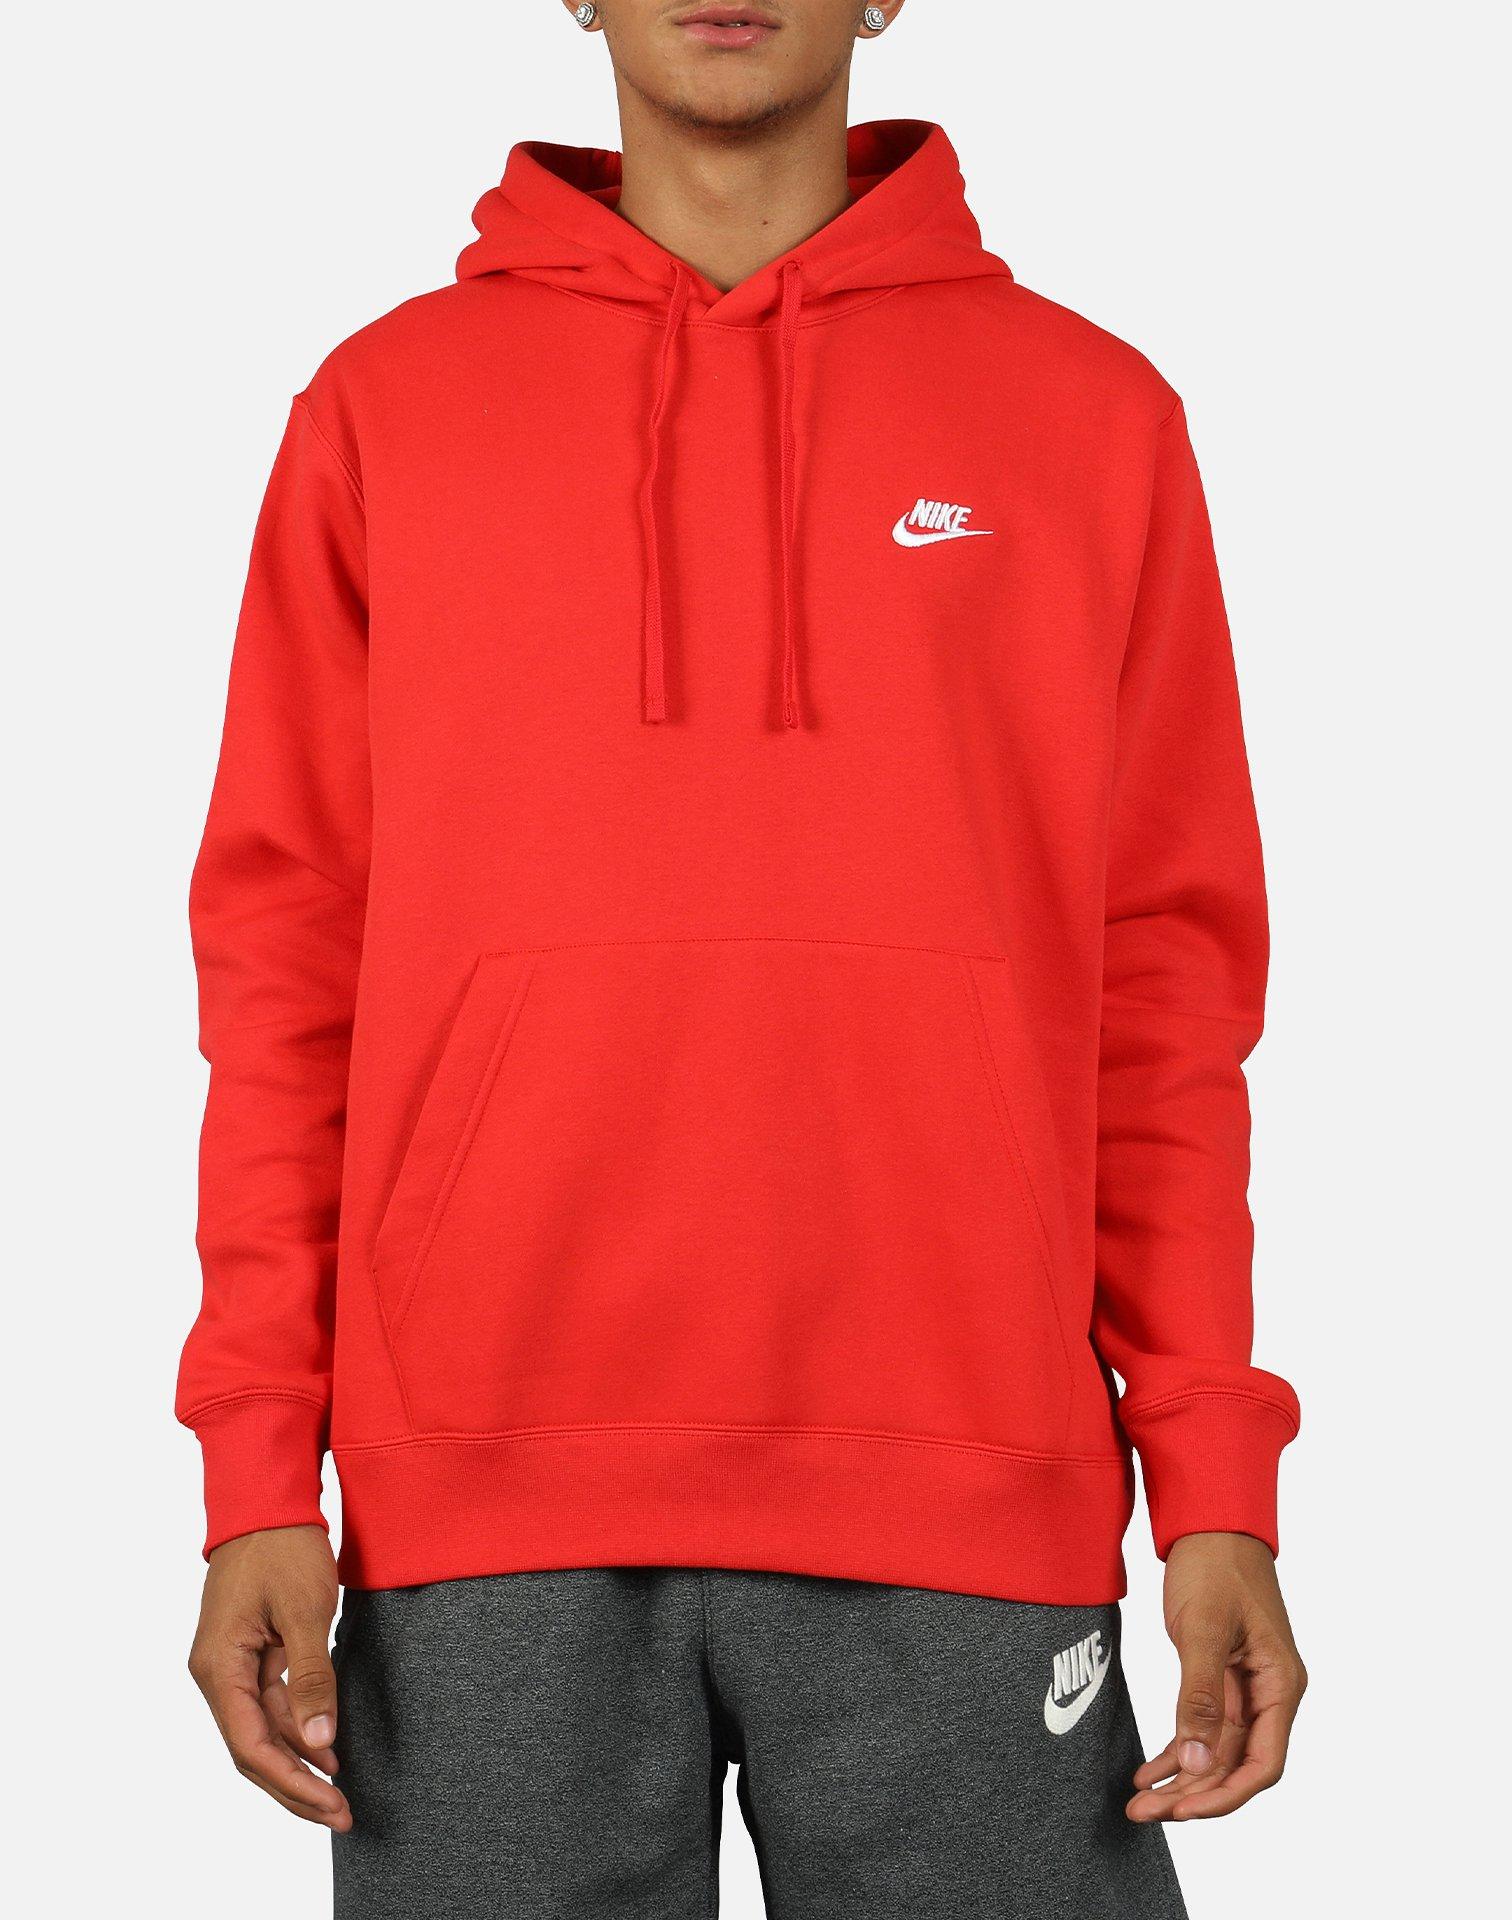 Nike Nsw Club Fleece Pullover Hoodie in Red for Men - Lyst